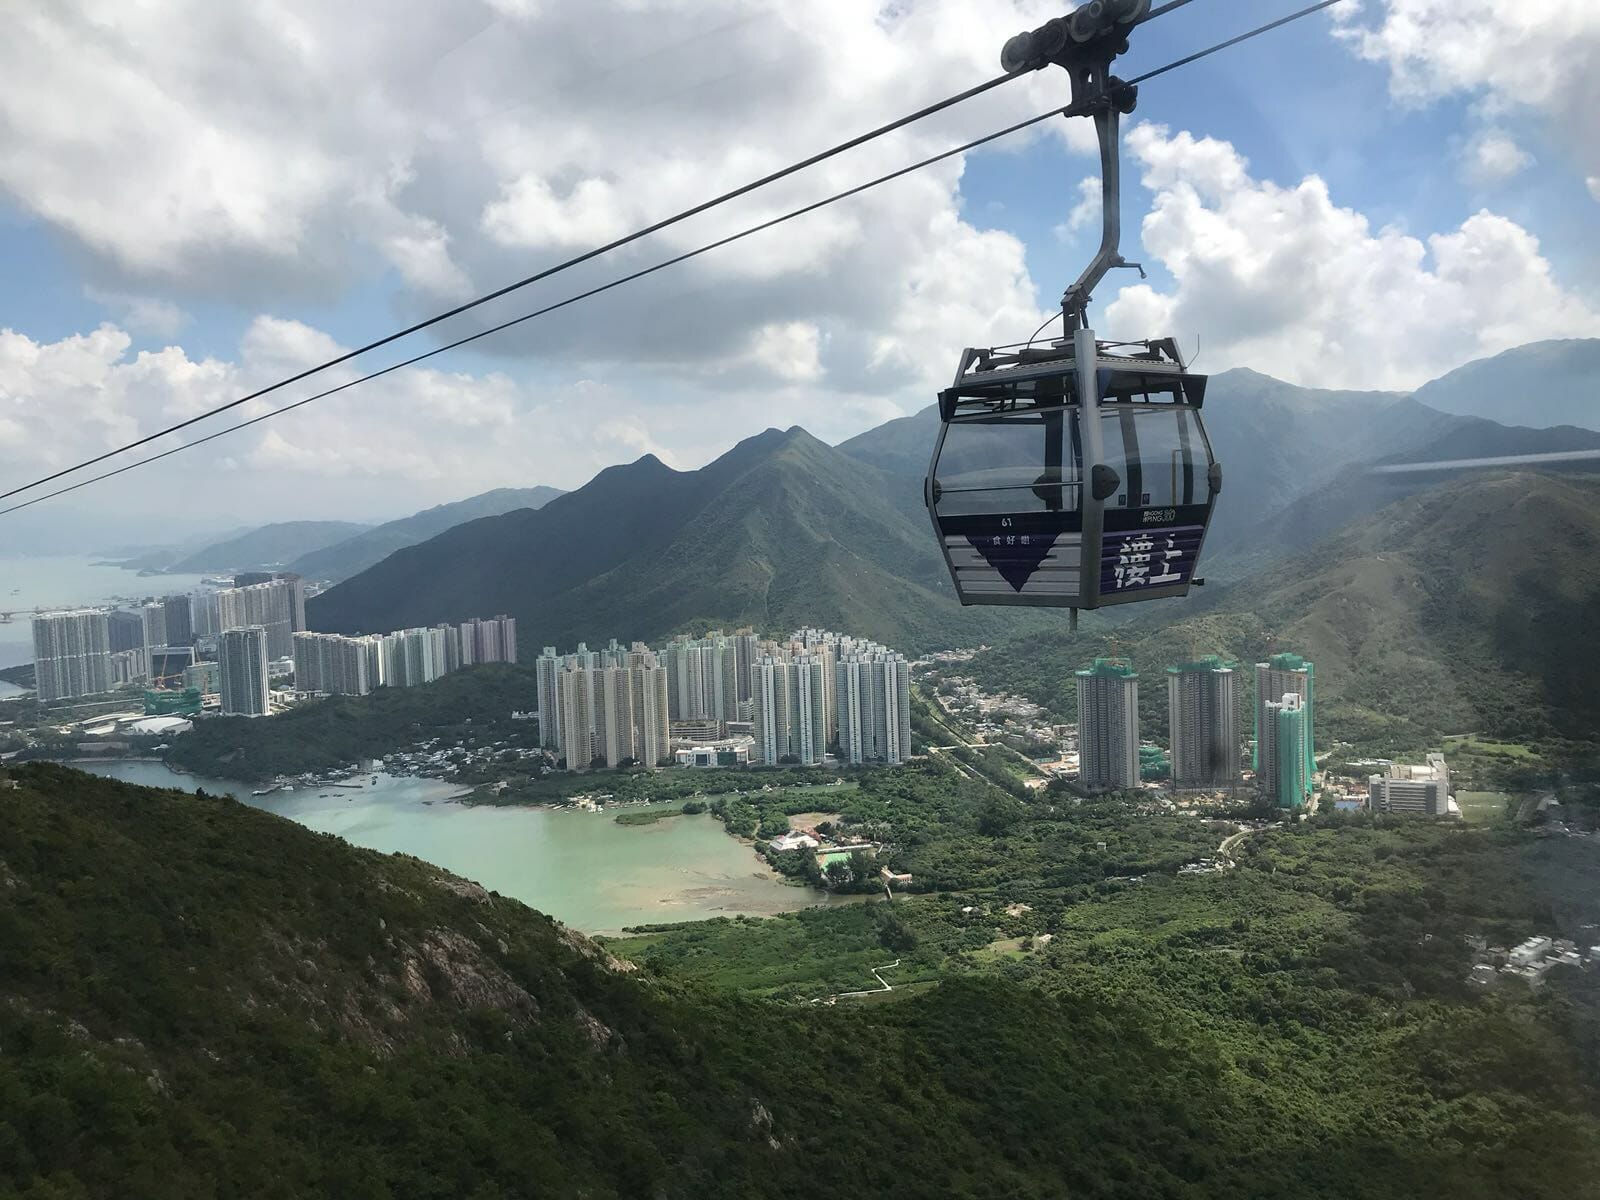 lantau island day tour with 360 cable car ride